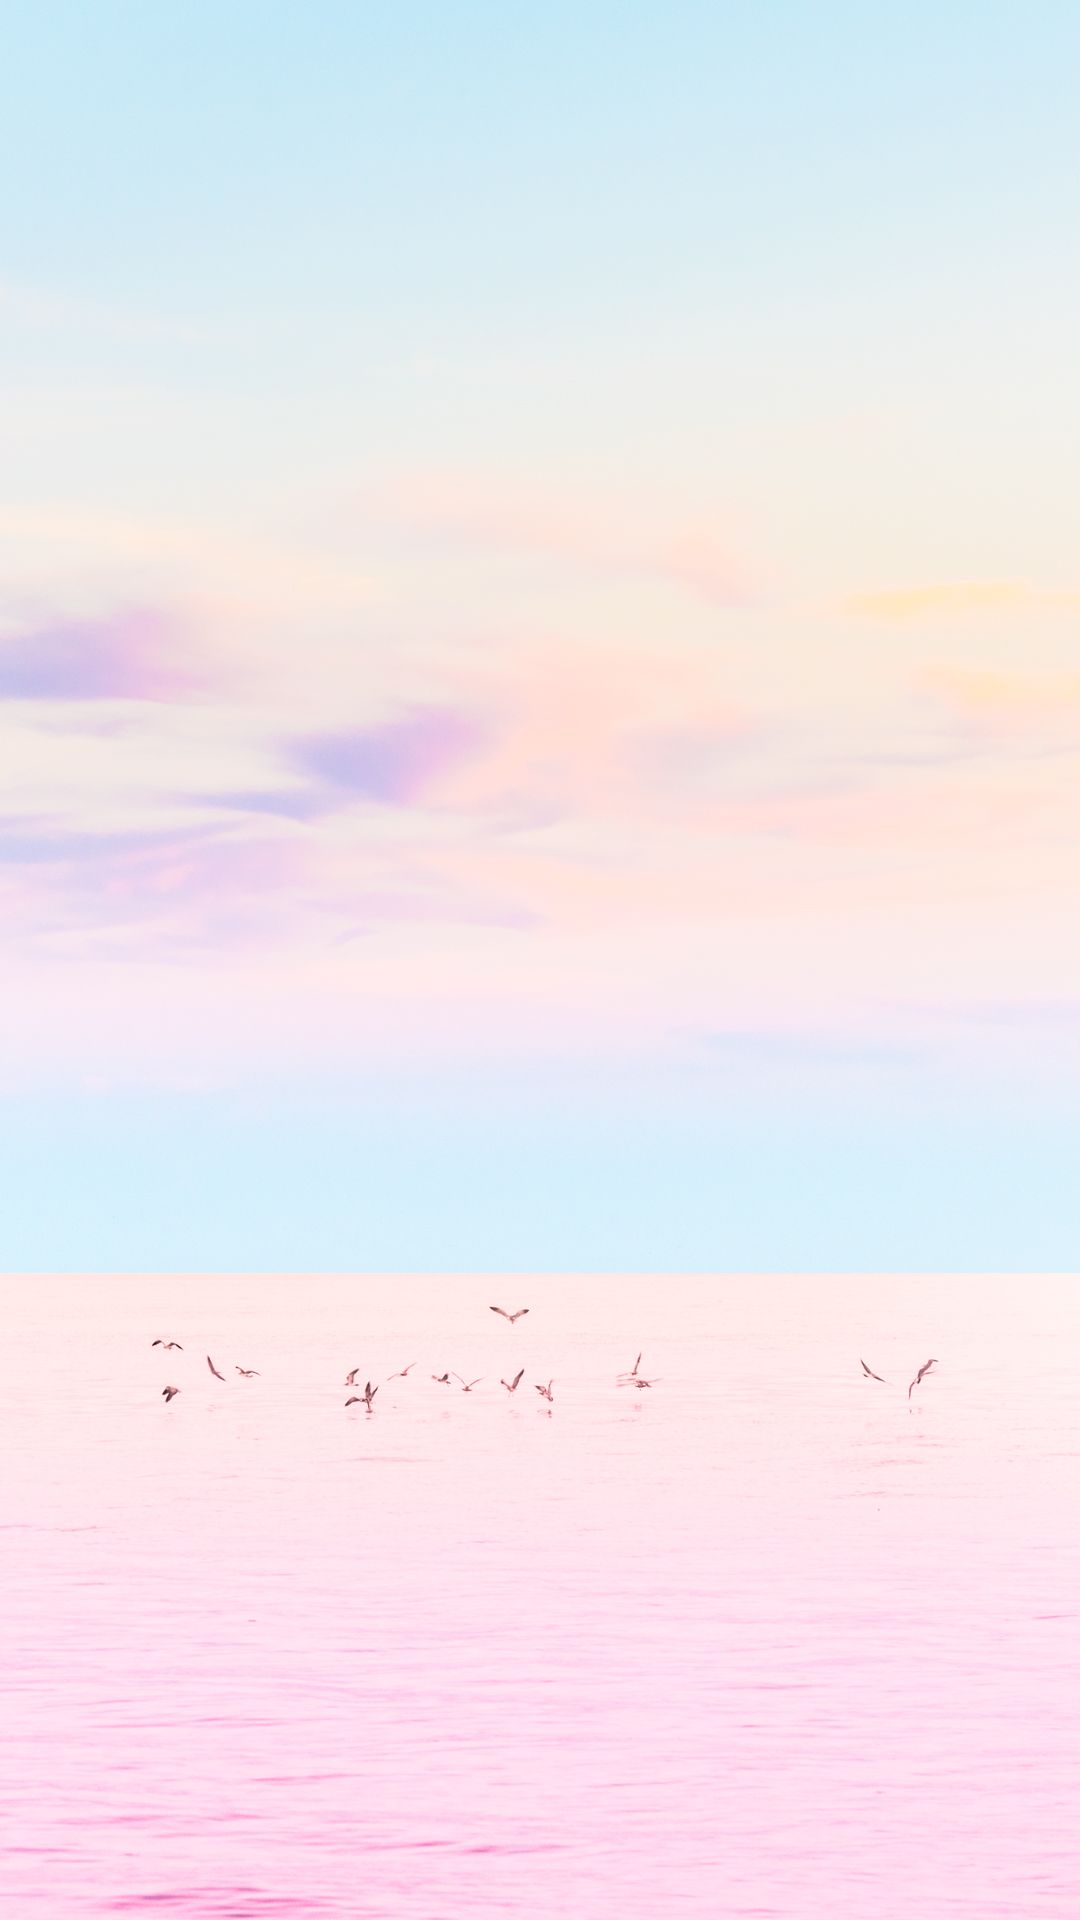 A flock of birds flying over a pink lake - Pastel minimalist